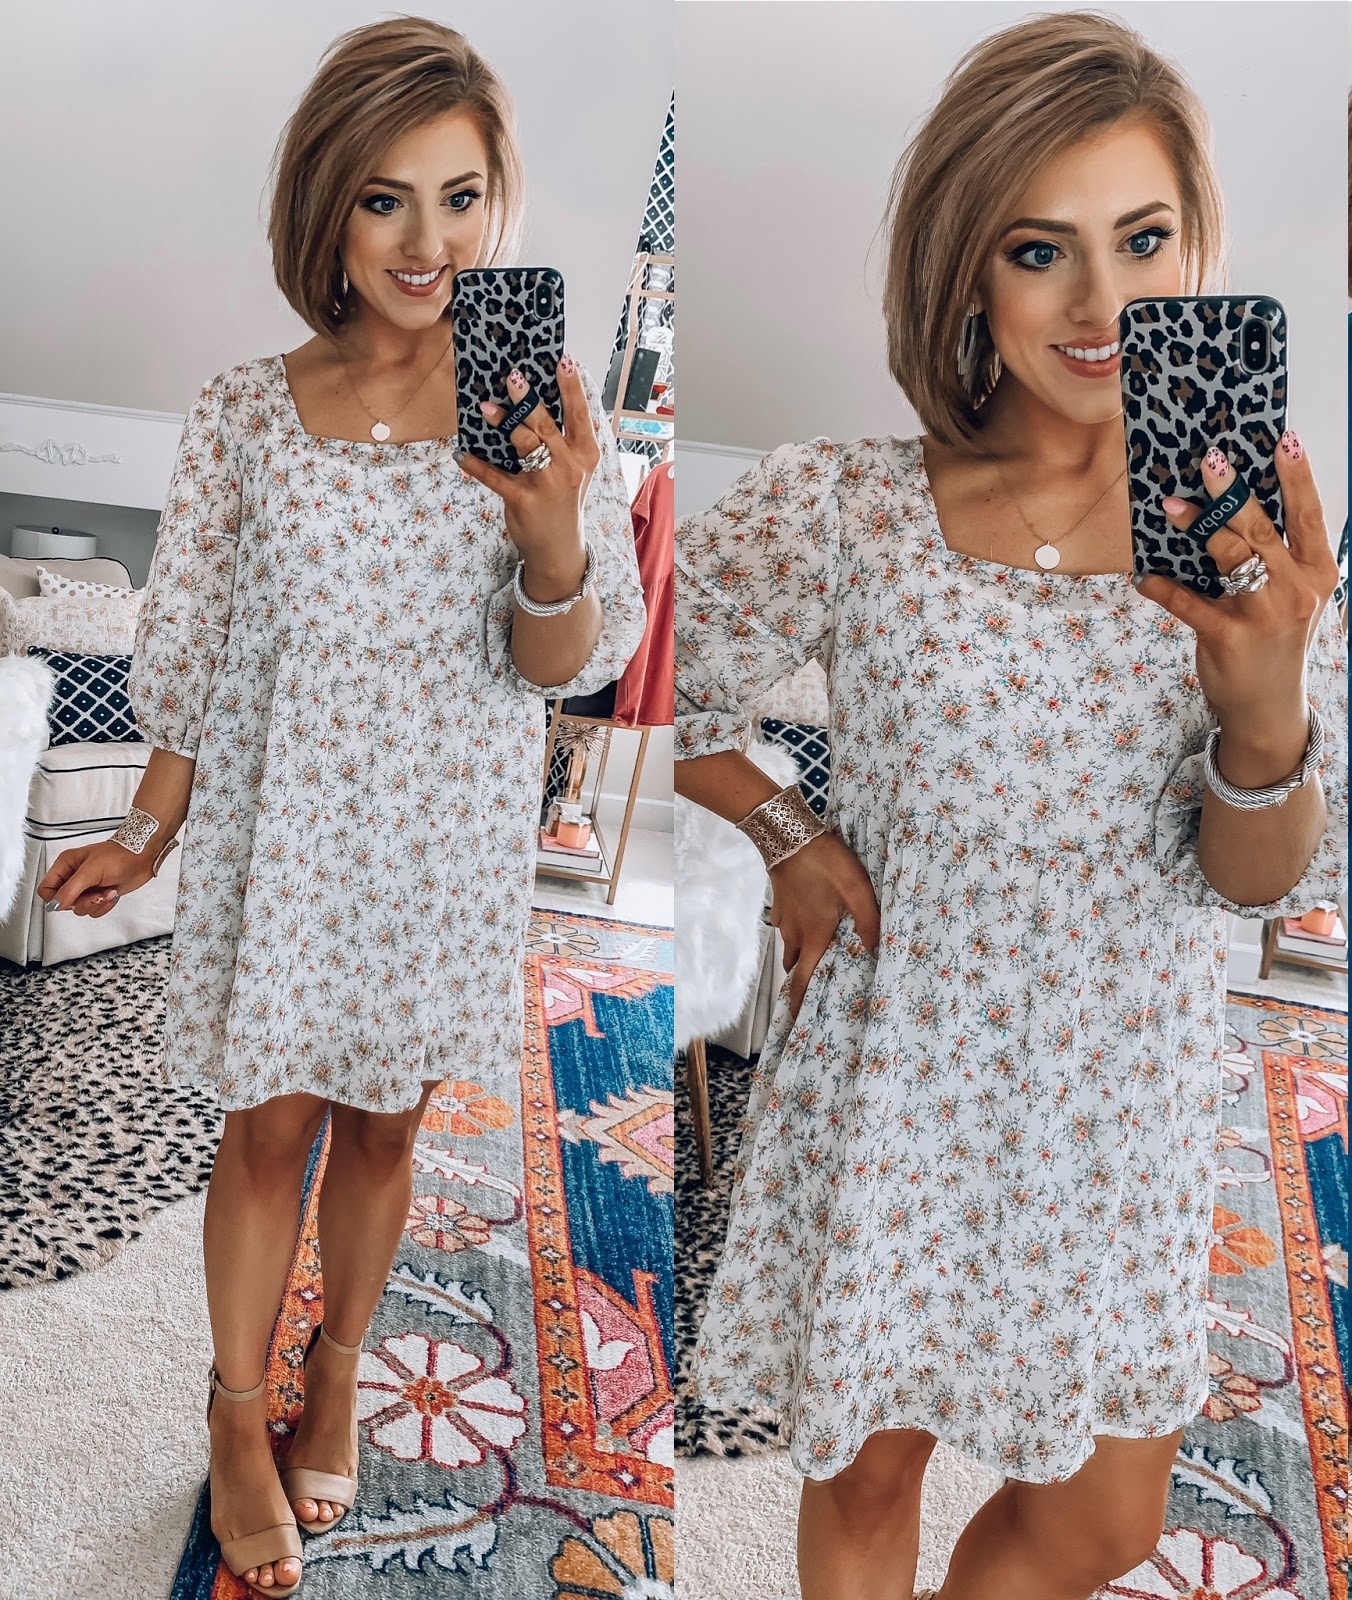 Target Finds: Spring 2020 - Something Delightful Blog - #TargetStyle Dresses, Shorts, Tops, Shoes and Accessories #TargetSpring #SpringStyle2020 #AffordableStyle